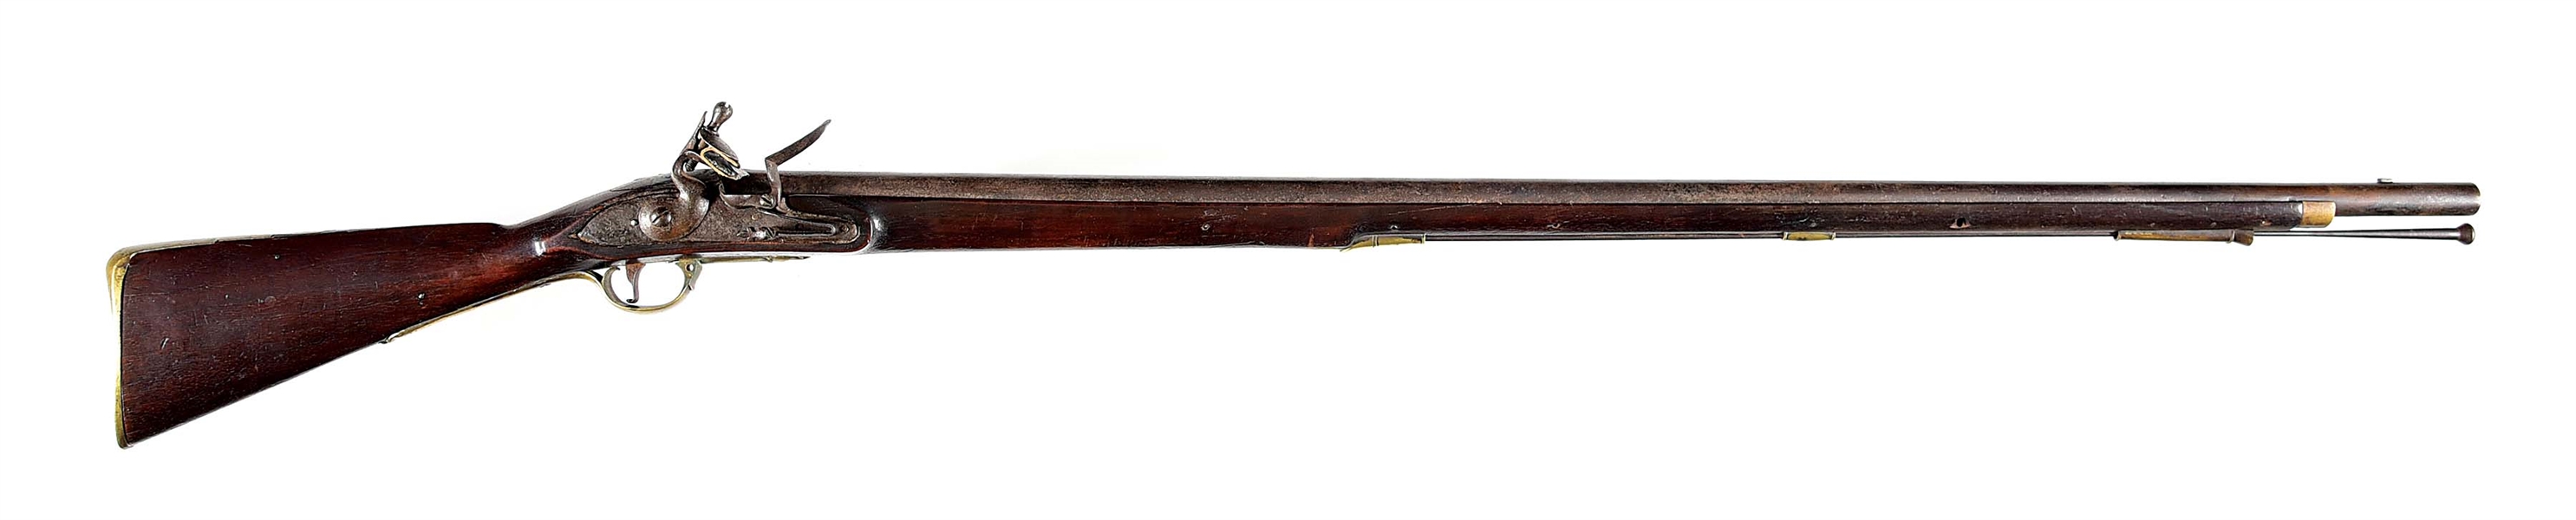 (A) AMERICAN STOCKED PATTERN 1756 BROWN BESS MUSKET.